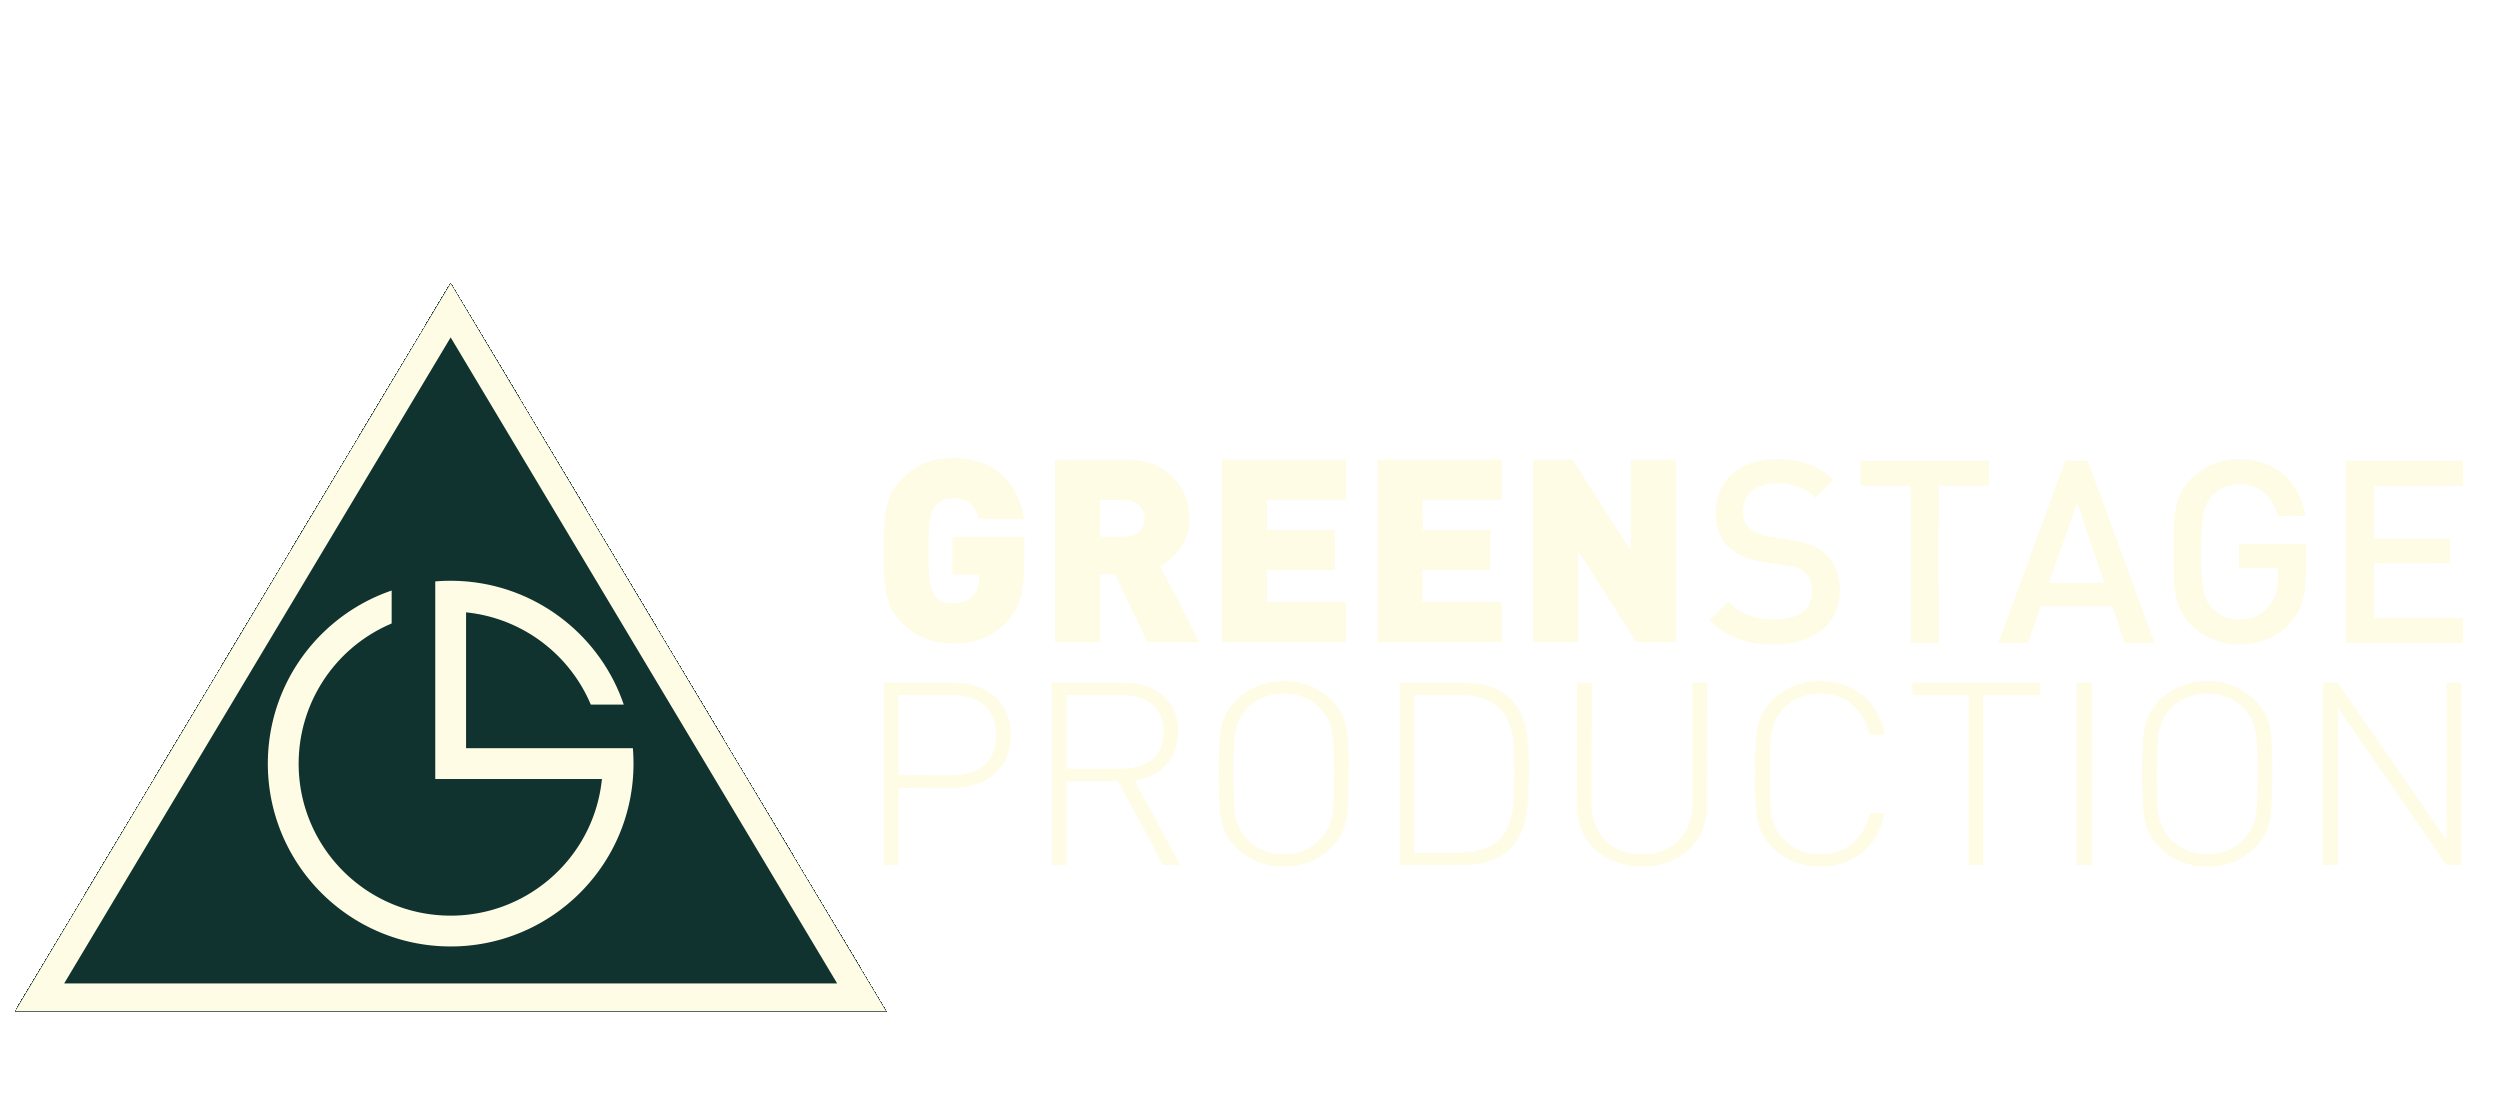 Greenstage Production